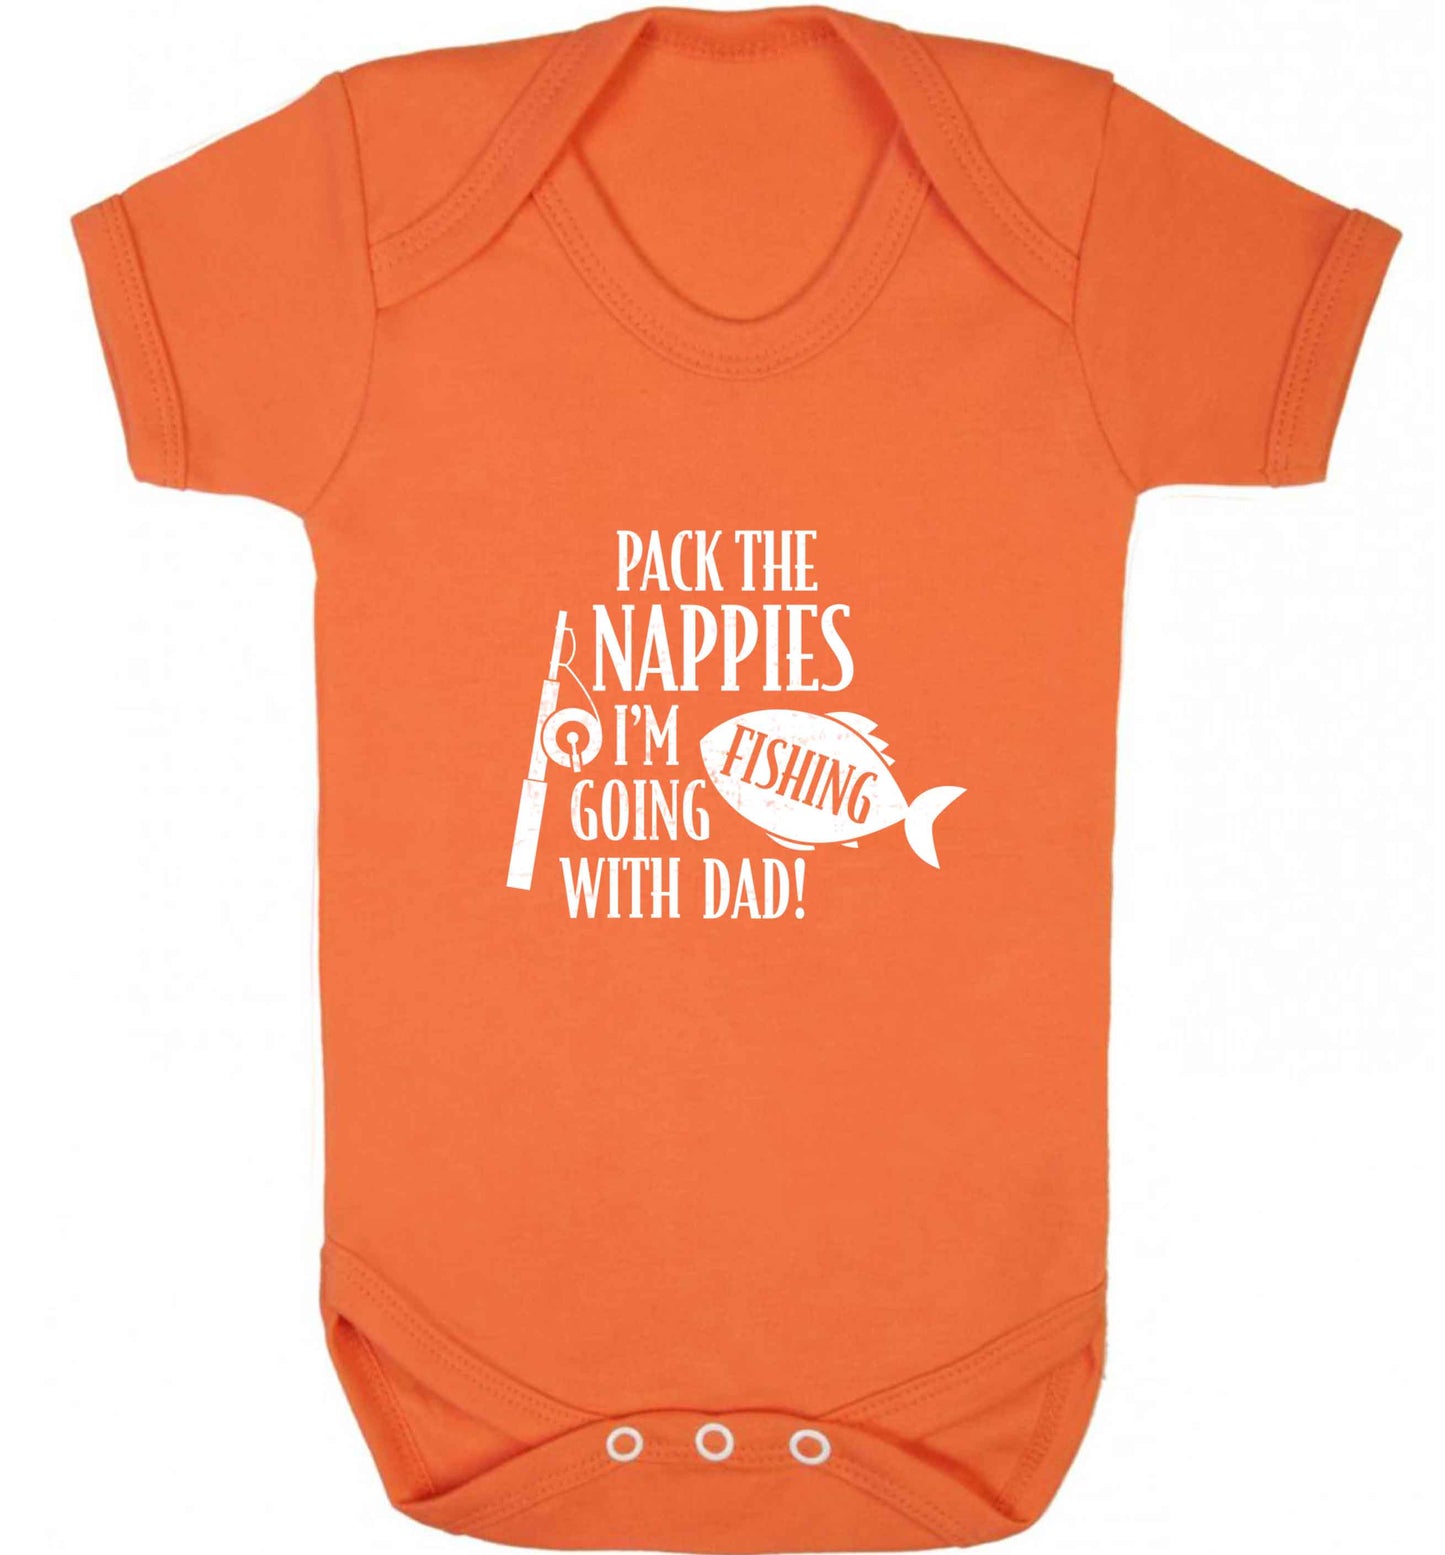 Pack the nappies I'm going fishing with Dad baby vest orange 18-24 months